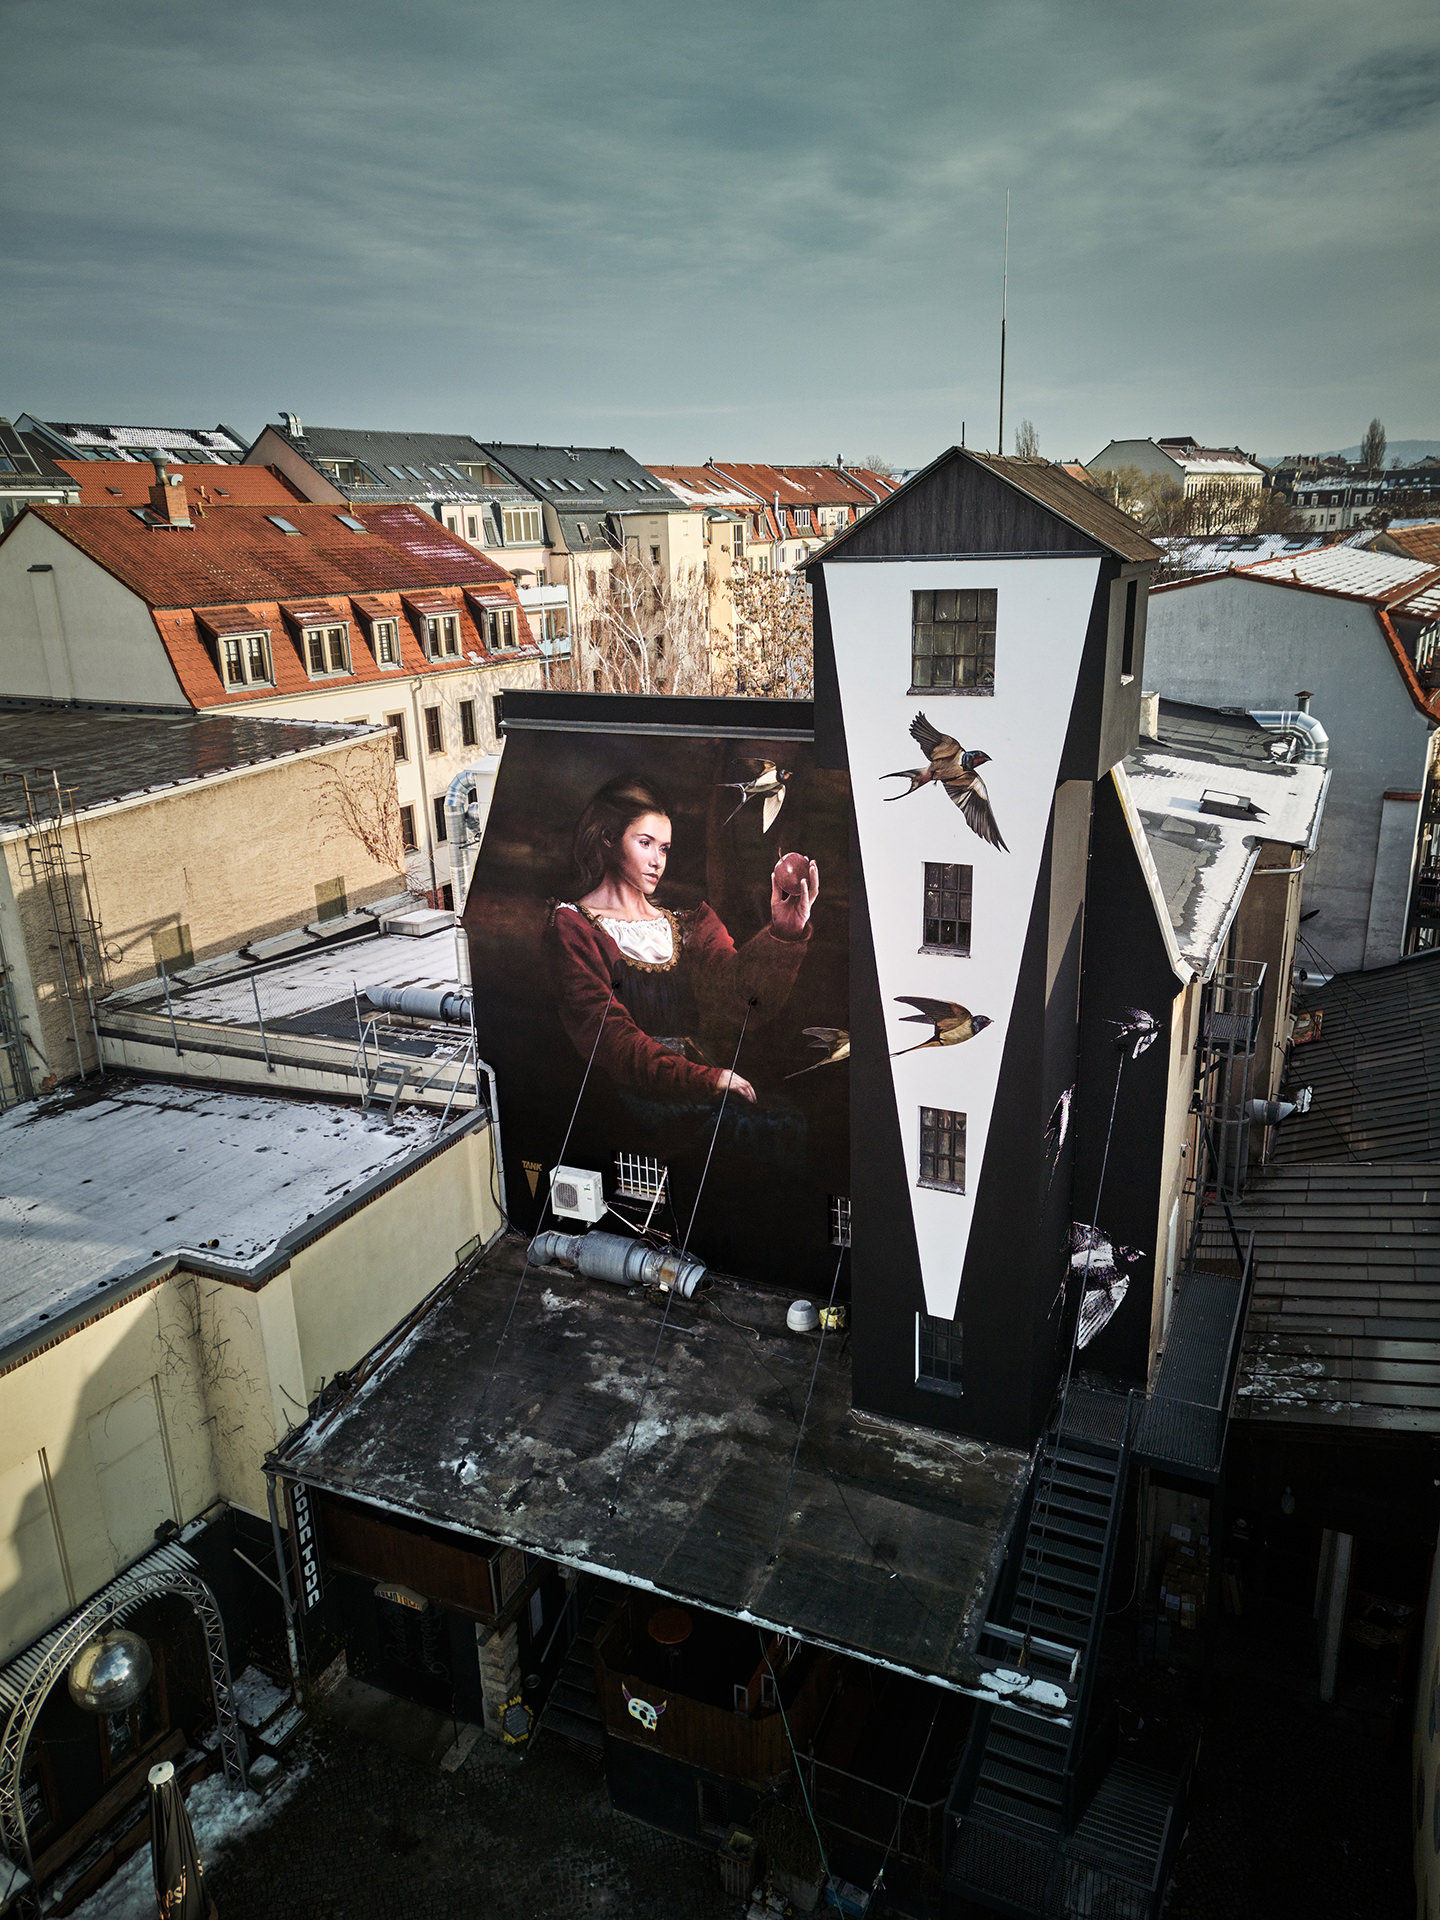 Mural "Gift" by Tank, Urban Art Dresden, GrooveStation, photo by Concrete Candy